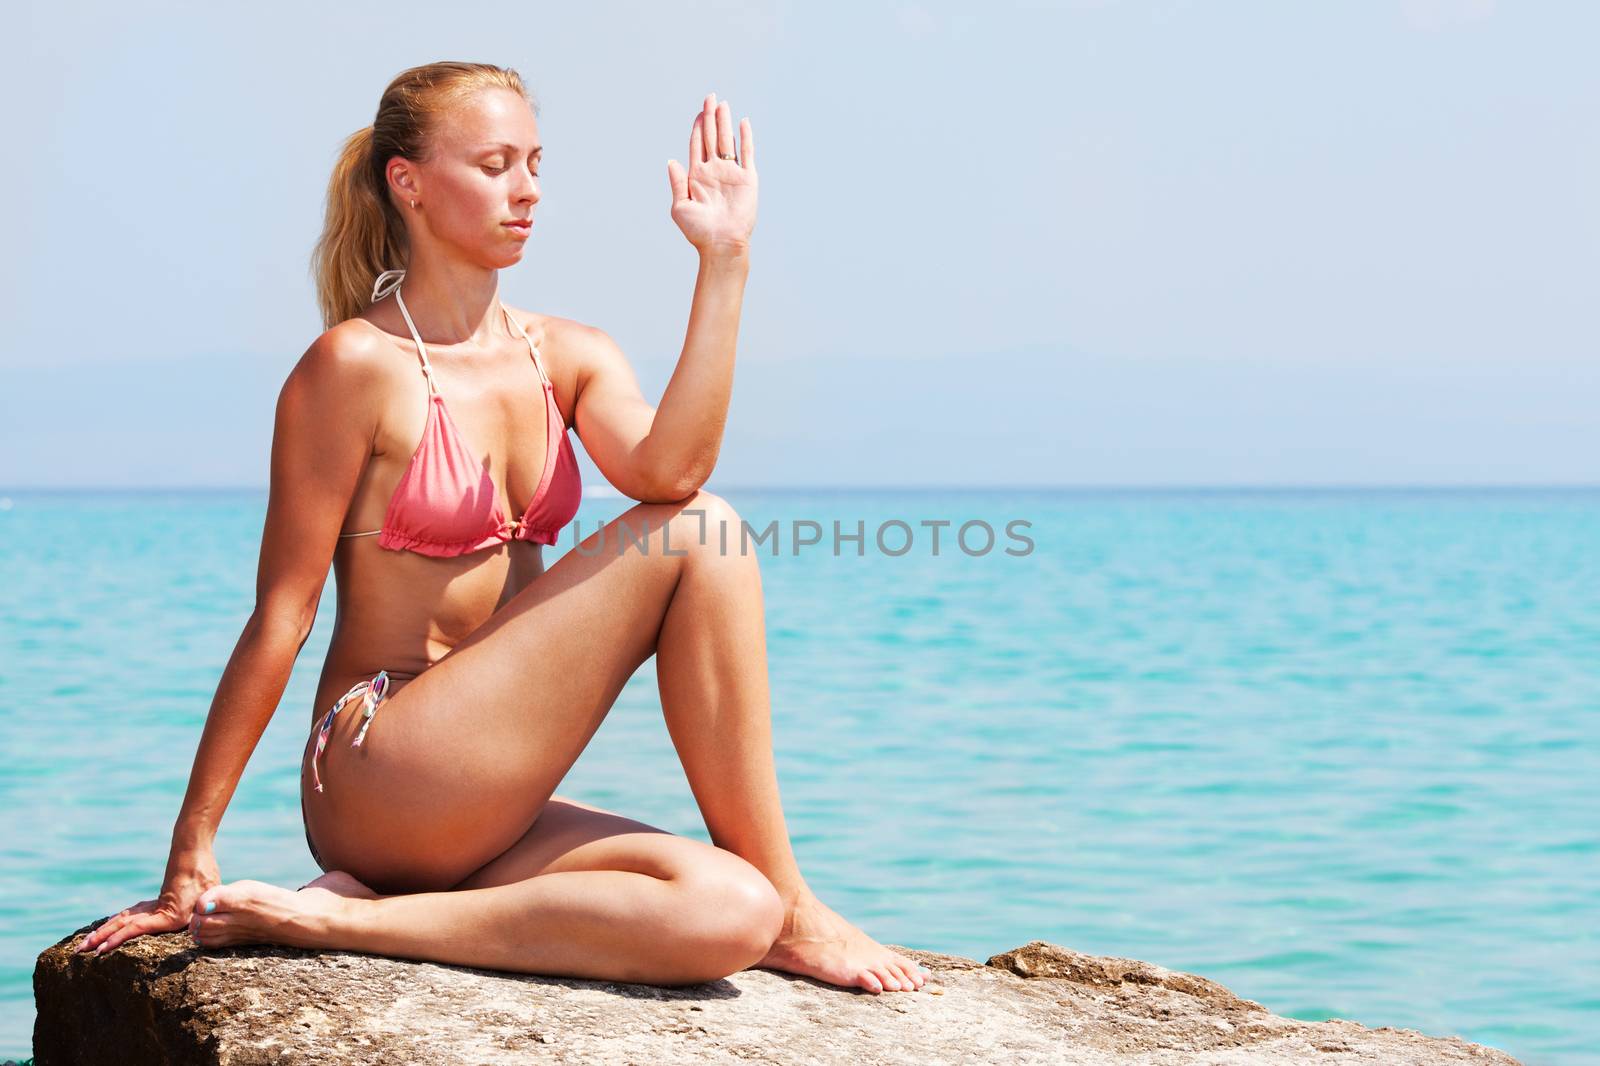 Yoga on the beach by MilanMarkovic78